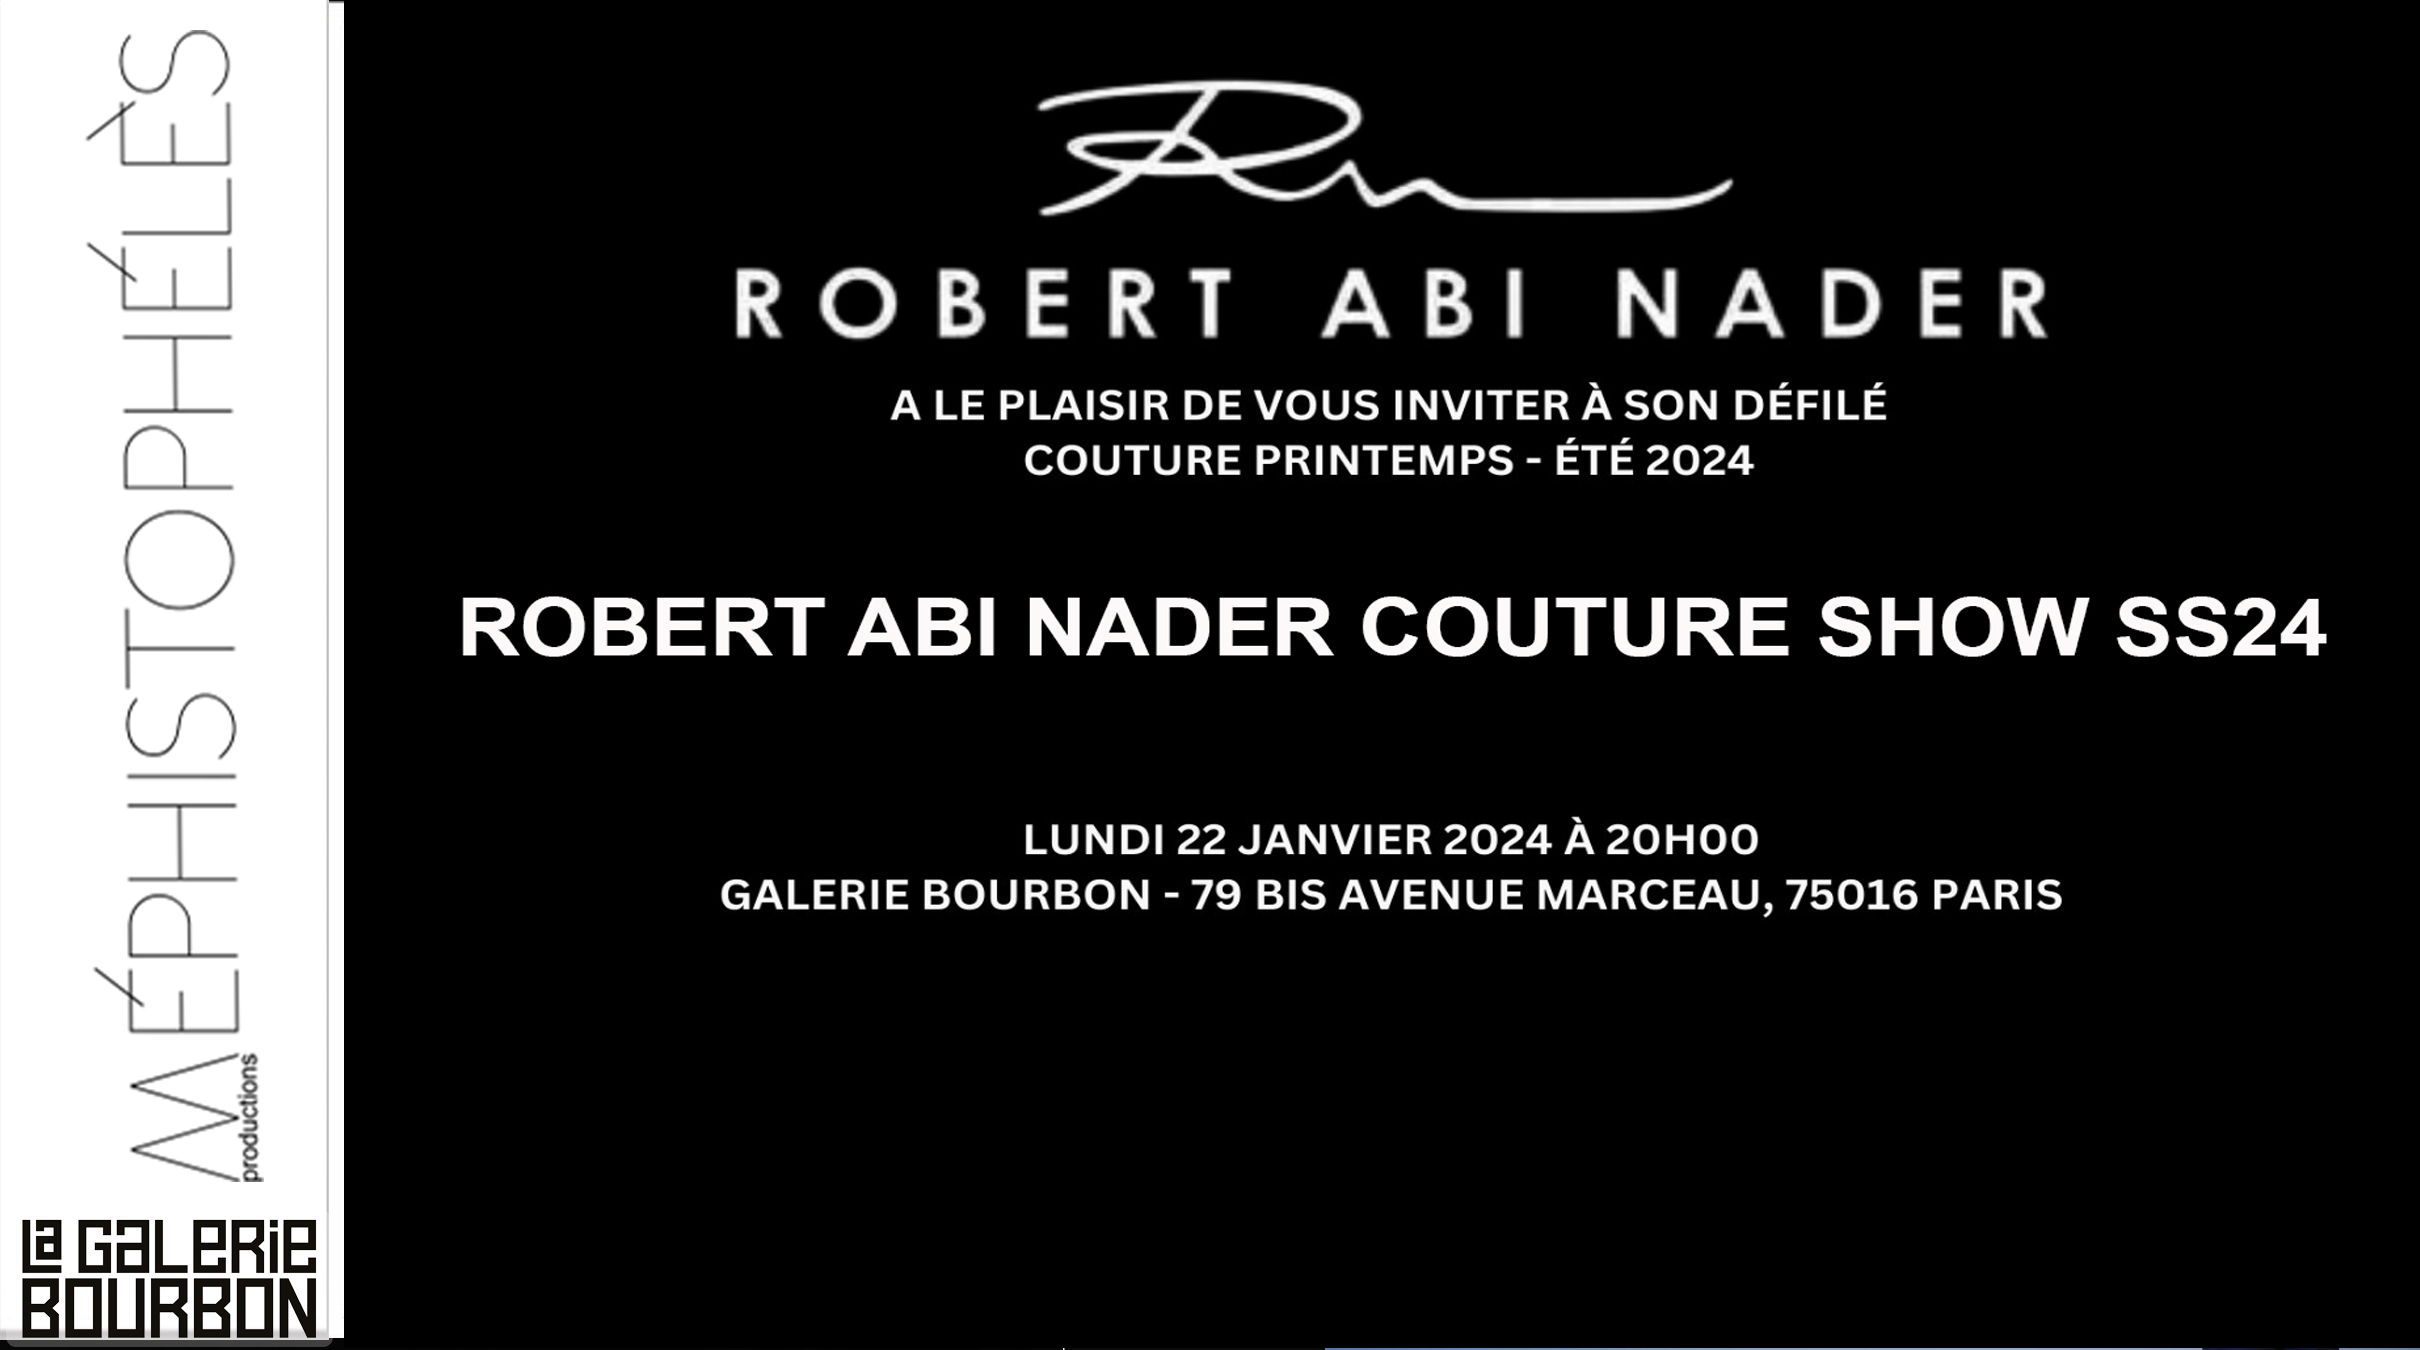 AFRICA-VOGUE-COVER-PFW-COUTURE-COLLECTION-SS24-ROBERT ABI NADER COUTURE SHOW SS24-L'OFFICIEL-INDIA-AEFW--DN-AFRICA-Media-Partner